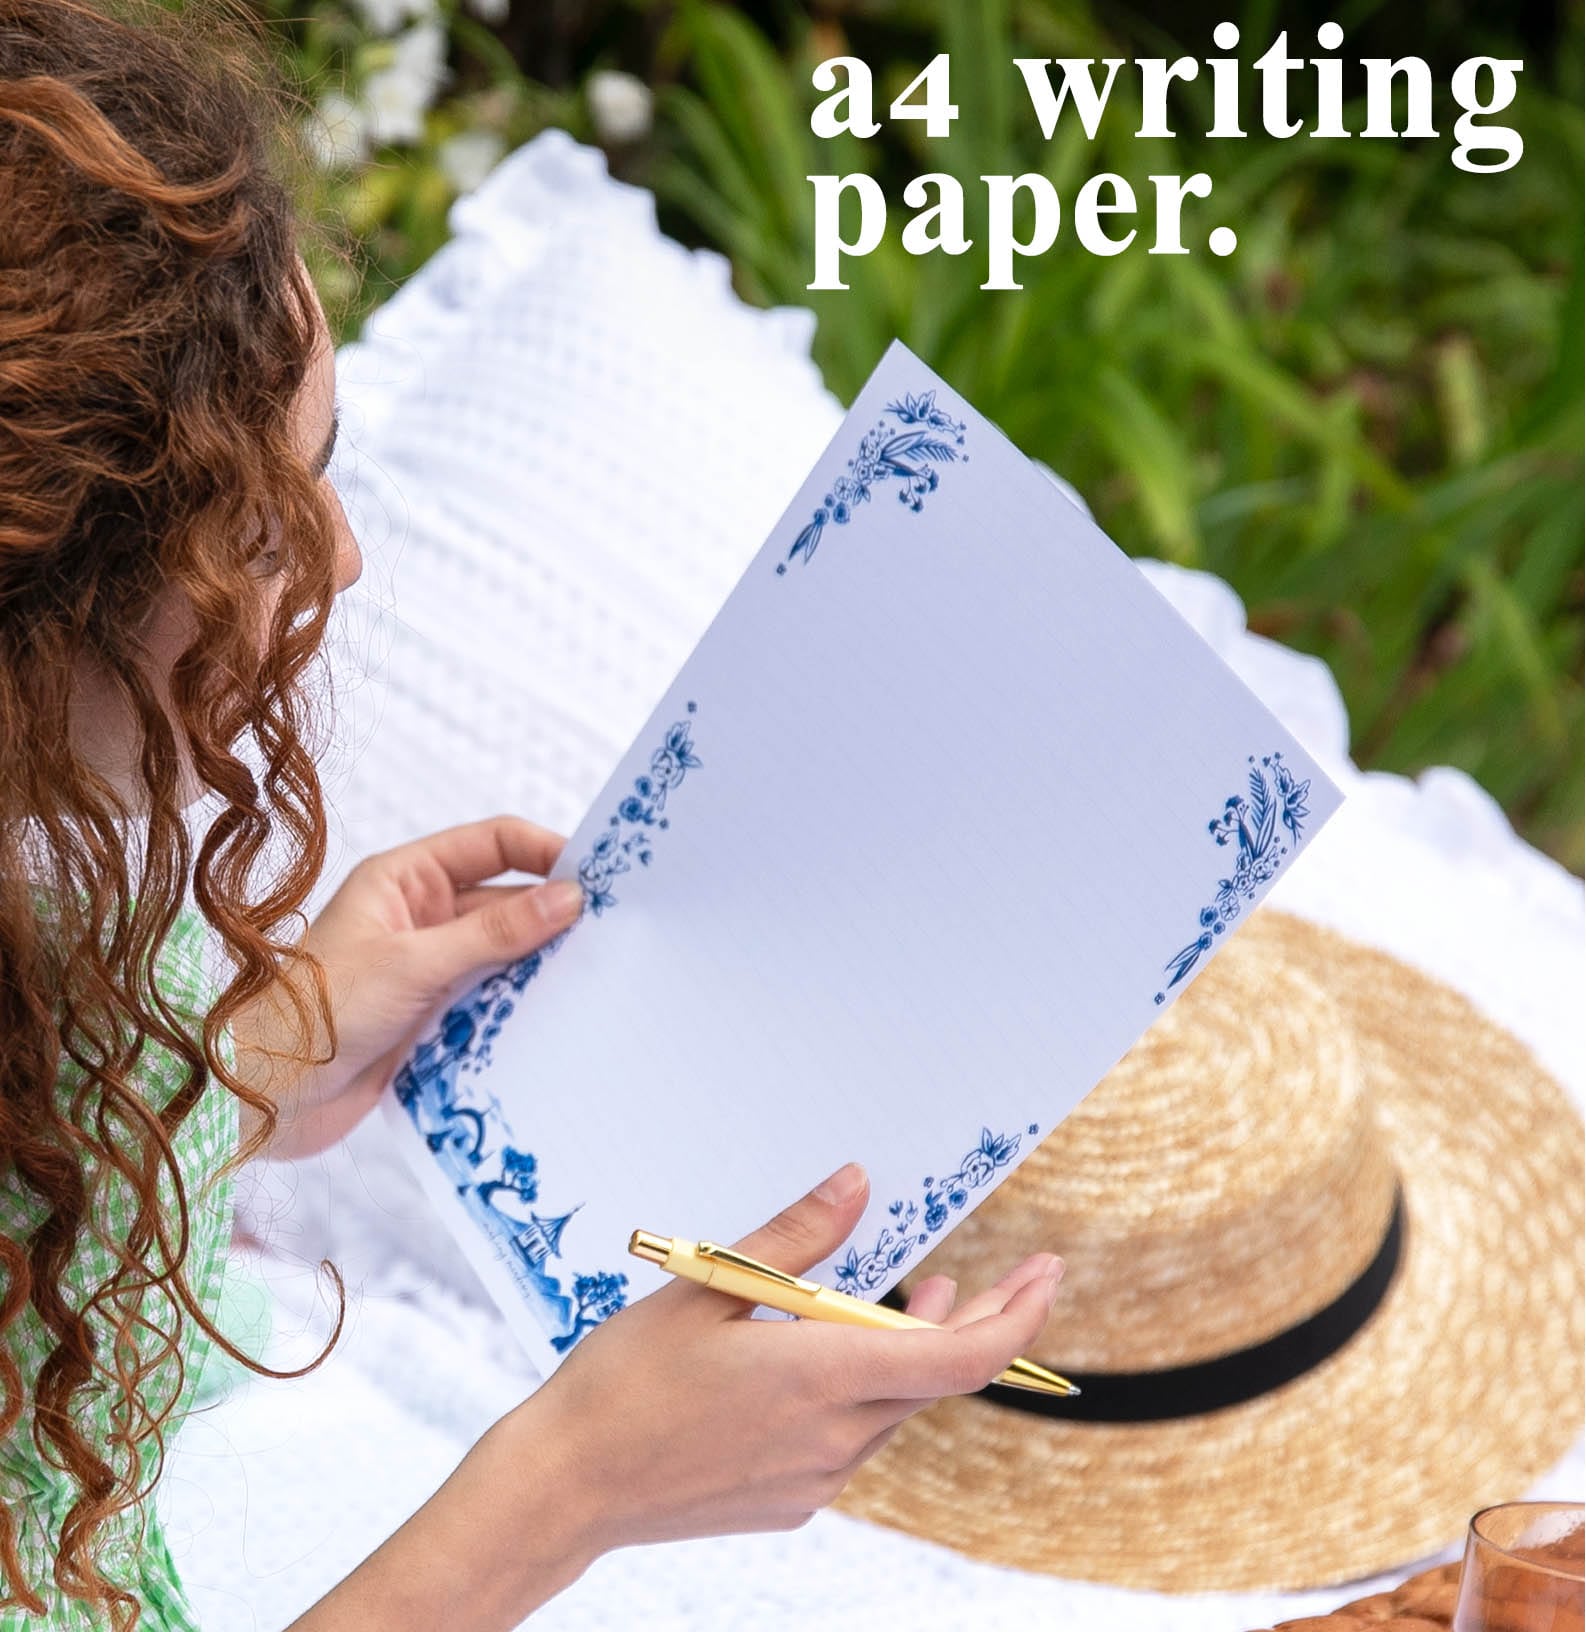 A4 letter writing paper